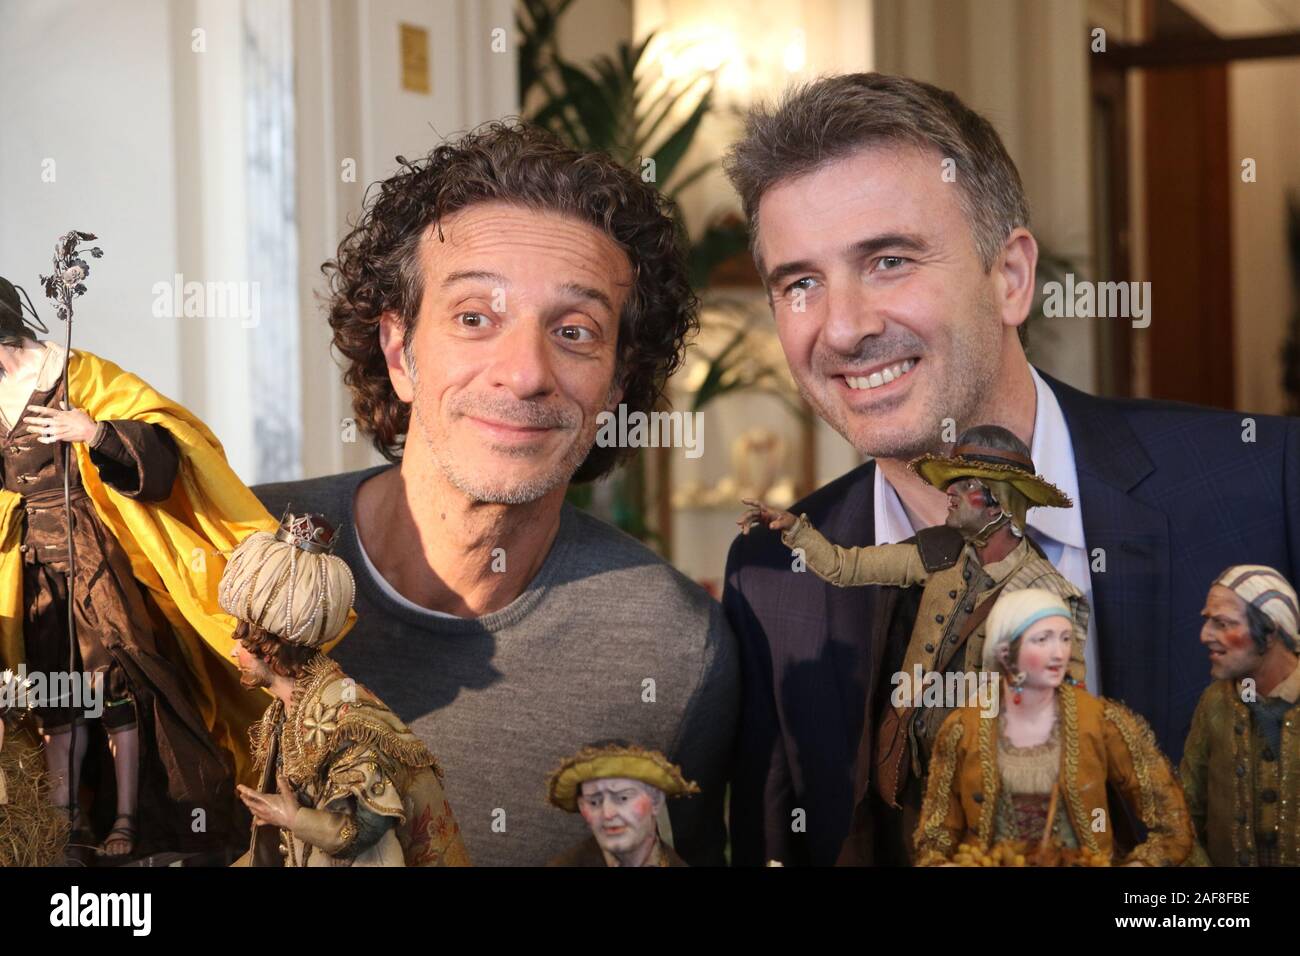 Napoli, Italy. 13th Dec, 2019. Photocall in Naples with cast and production of the movie titled IL PRIMO NATALE by and duo FICARRA & PICONE also Salvo Ficarra and Valentino Picone .In picture in order L to R:Salvo Ficarra, Valentino Picone, actor and director (Photo by Salvatore Esposito/Pacific Press) Credit: Pacific Press Agency/Alamy Live News Stock Photo